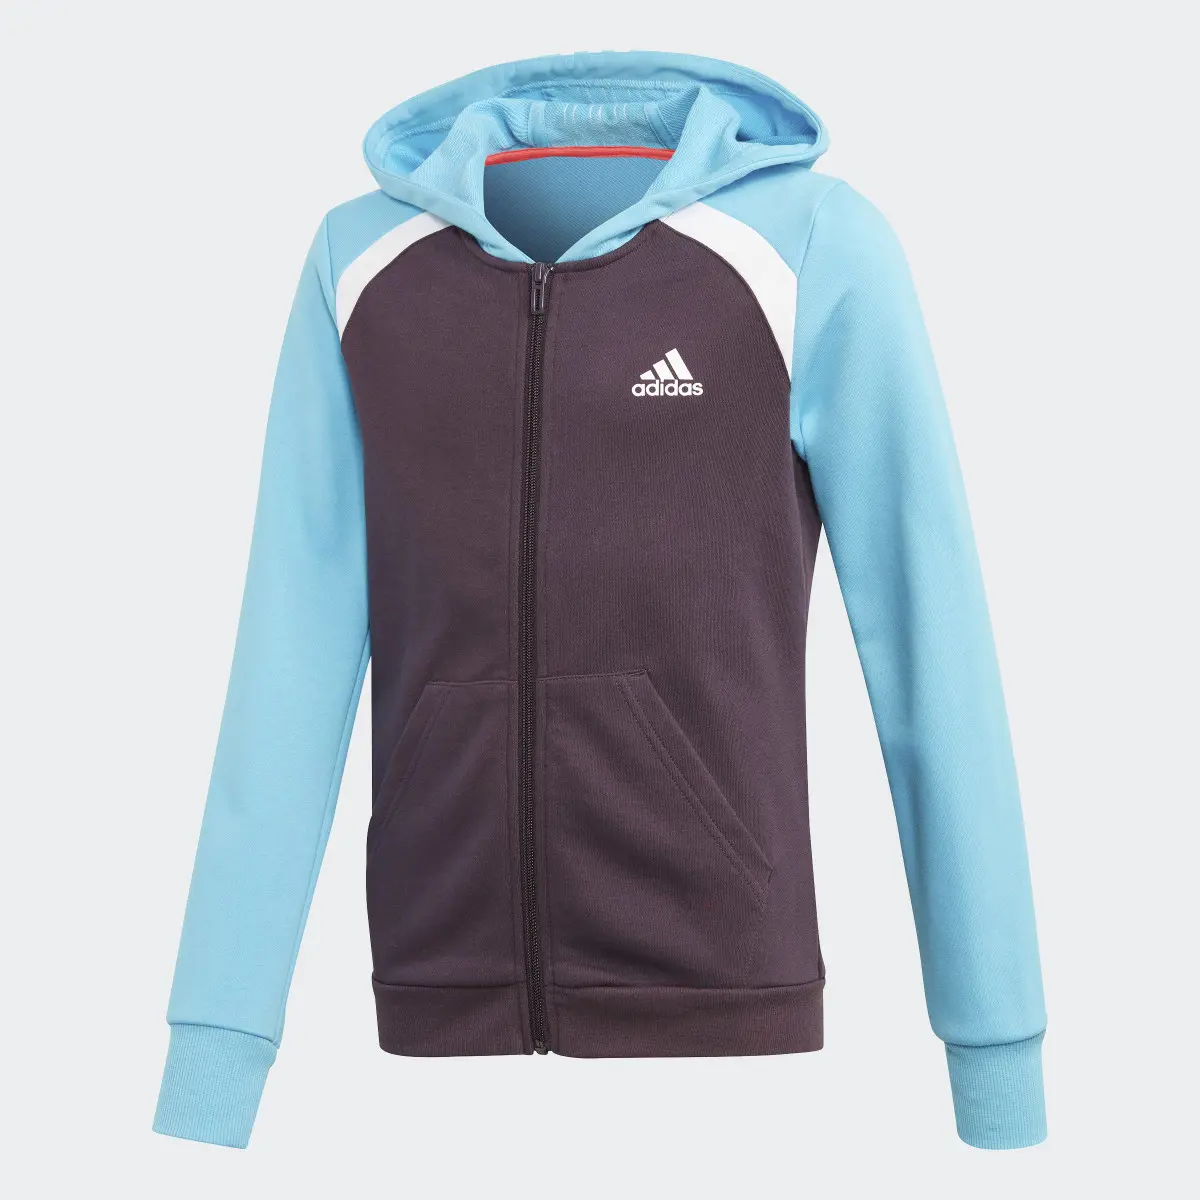 Adidas Hooded Cotton Track Suit. 2